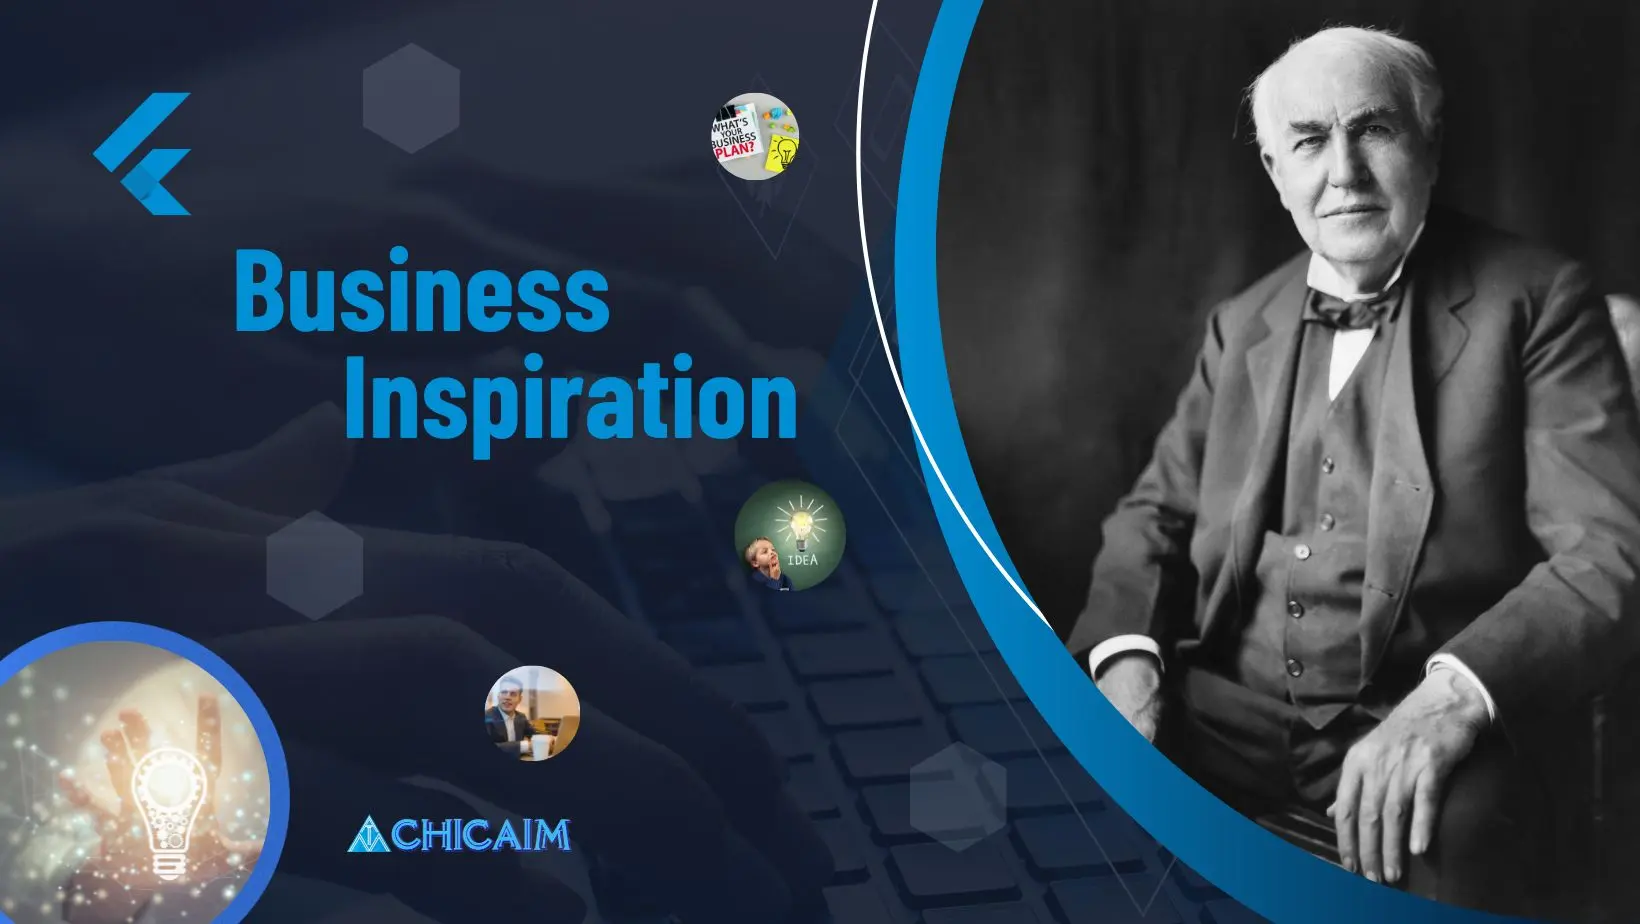 Business inspiration from Thomas Edison as he succeeded.